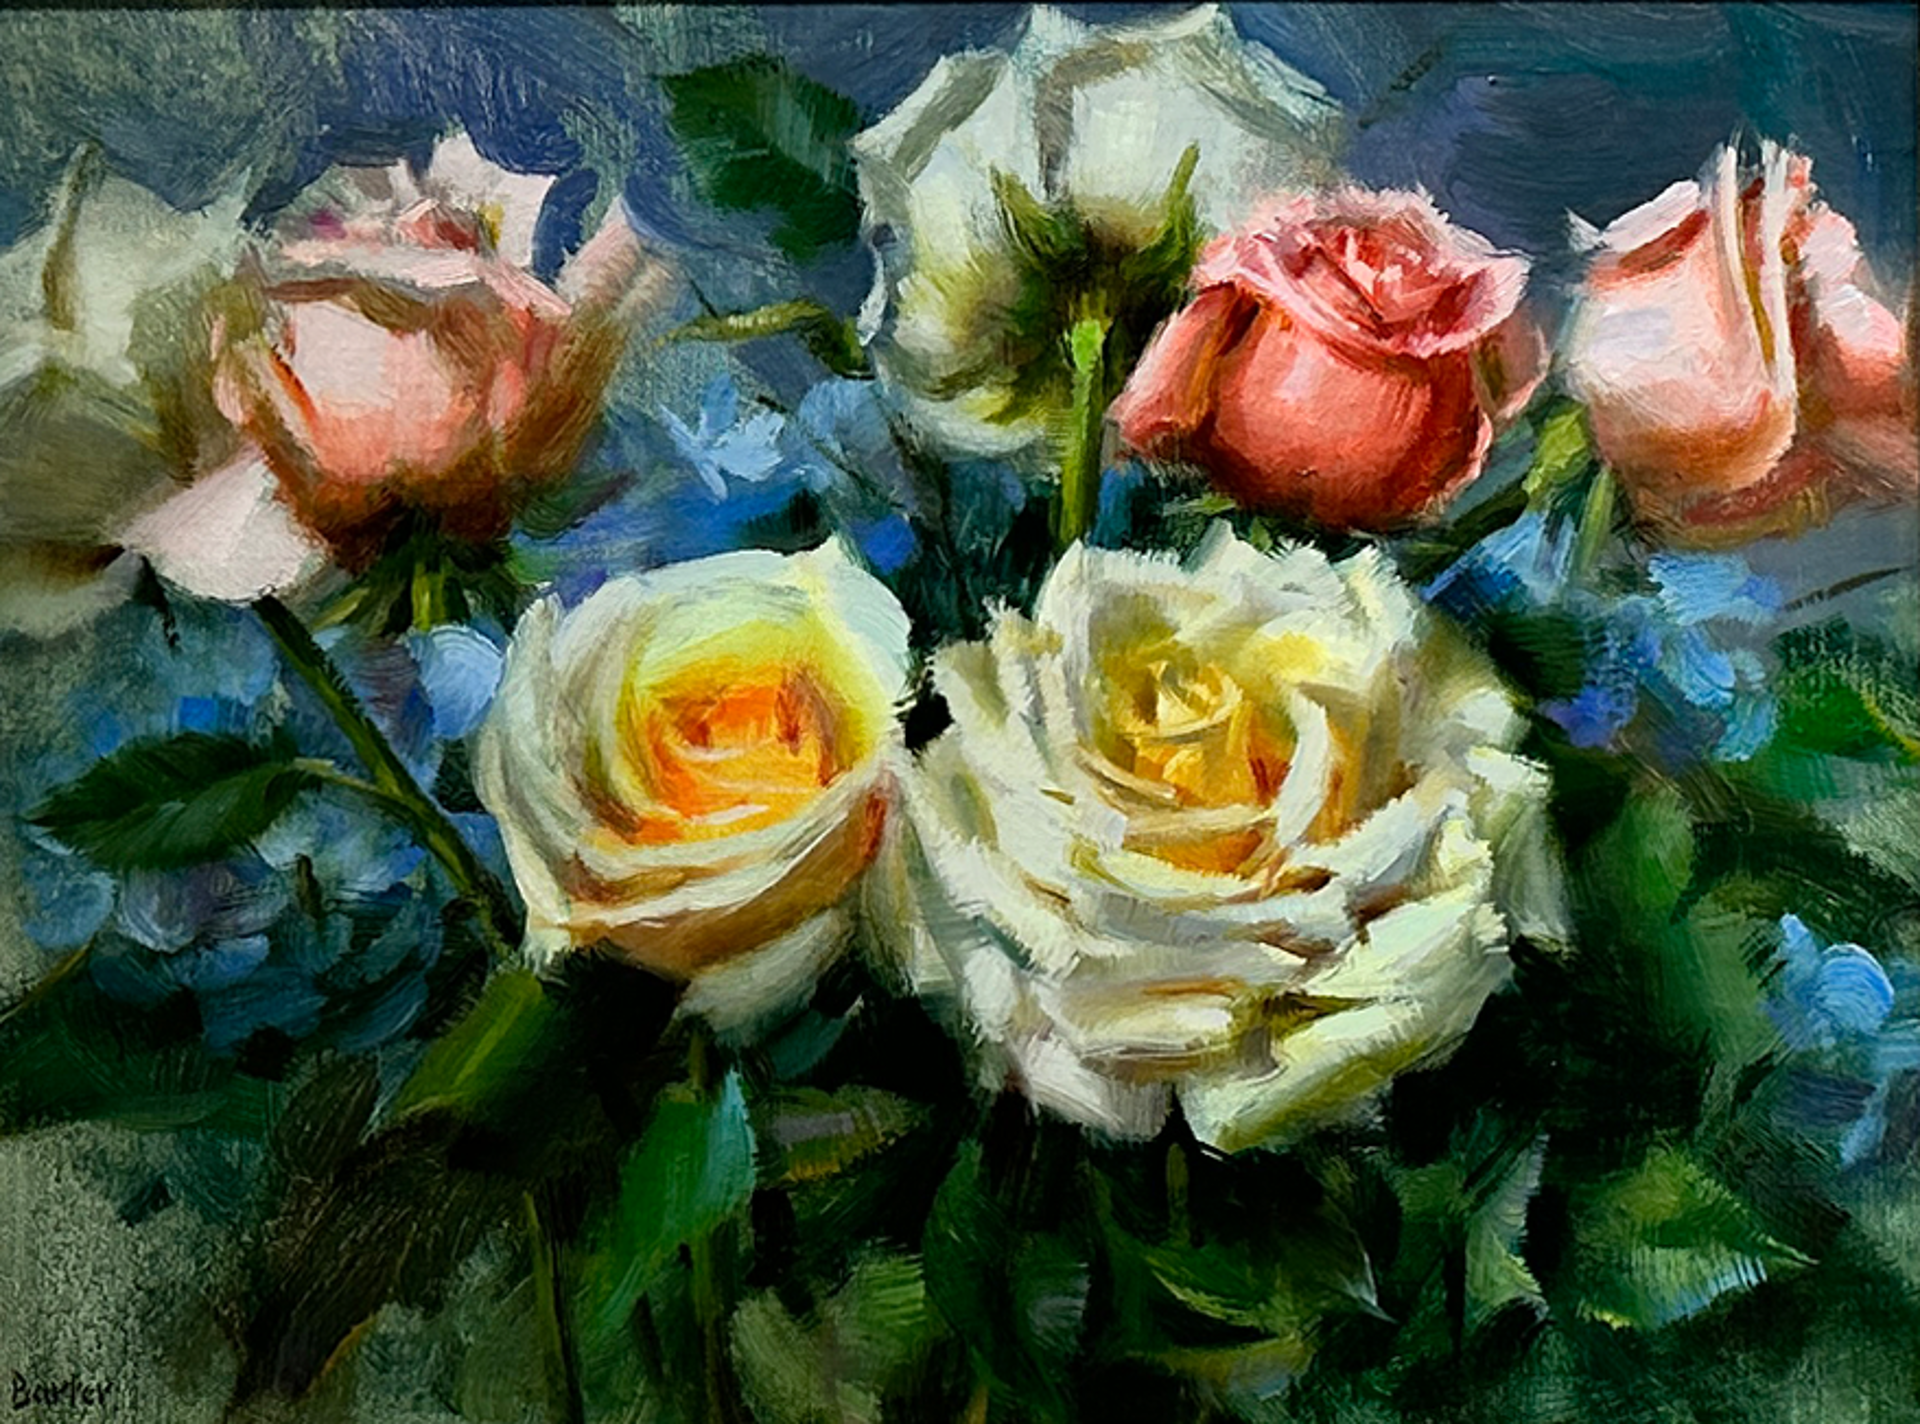 "Velvety Roses and Hydrangea" by Stacy Barter